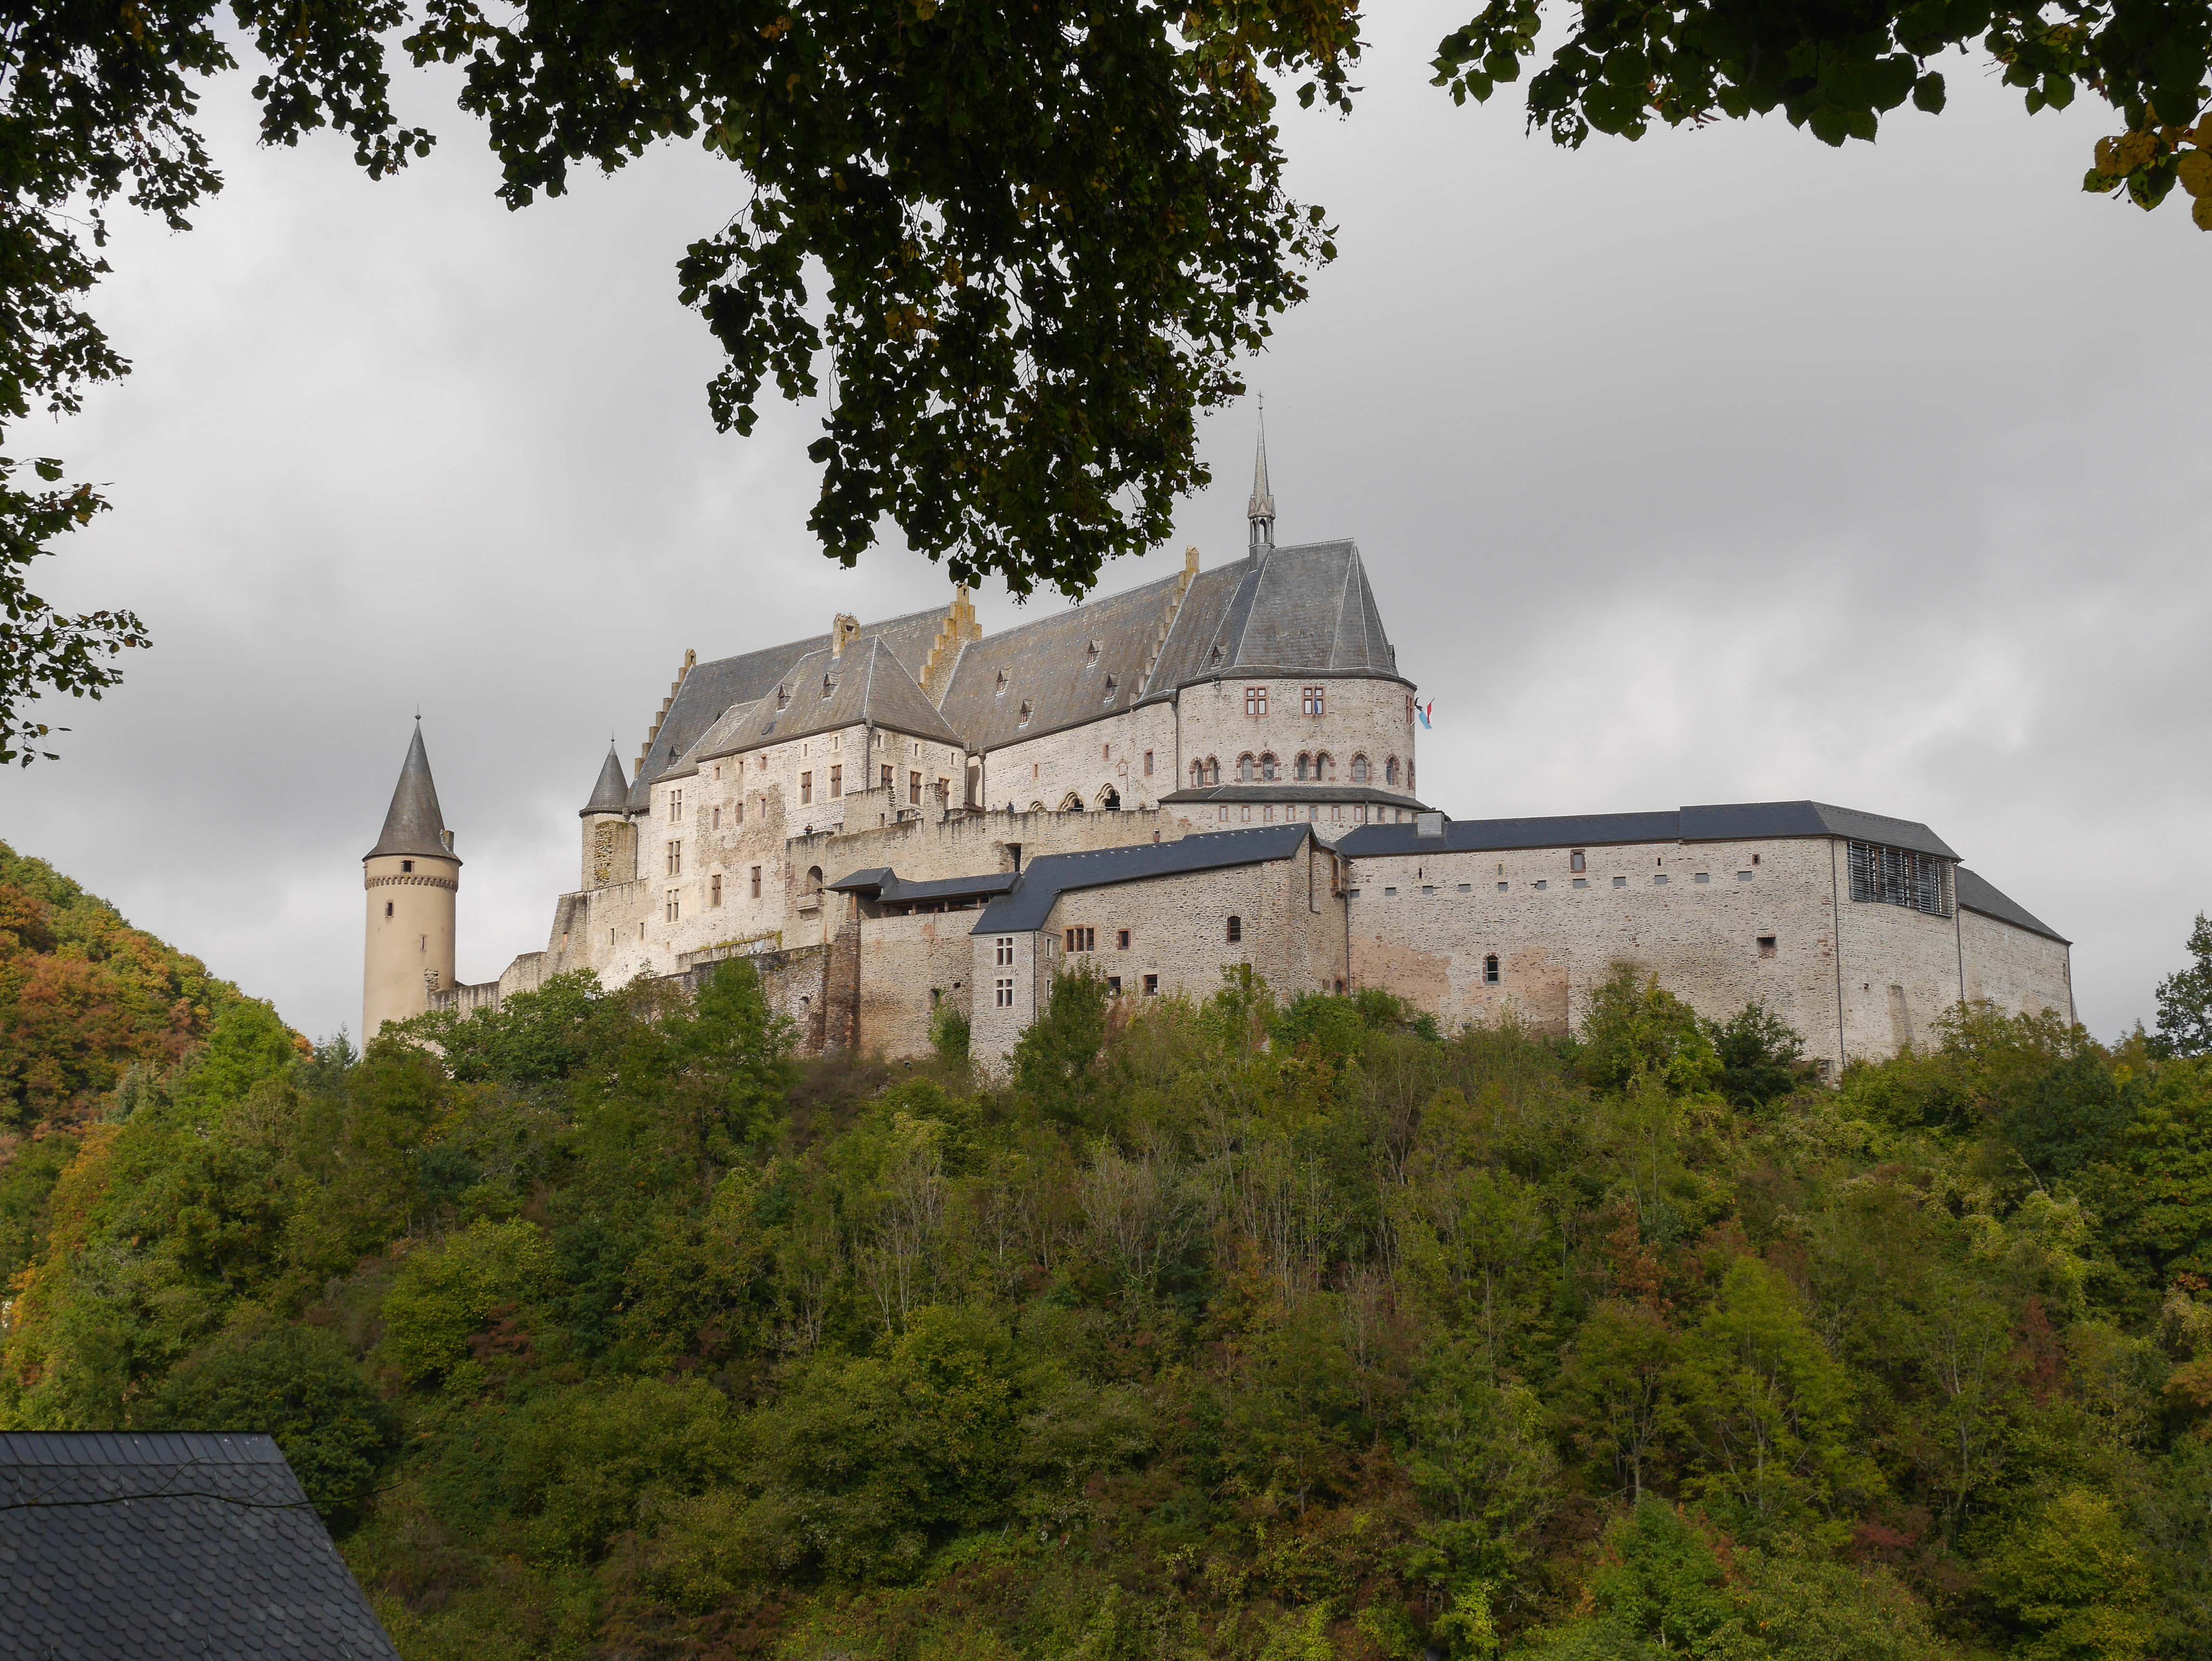 Have you ever been to Luxembourg? Why not?